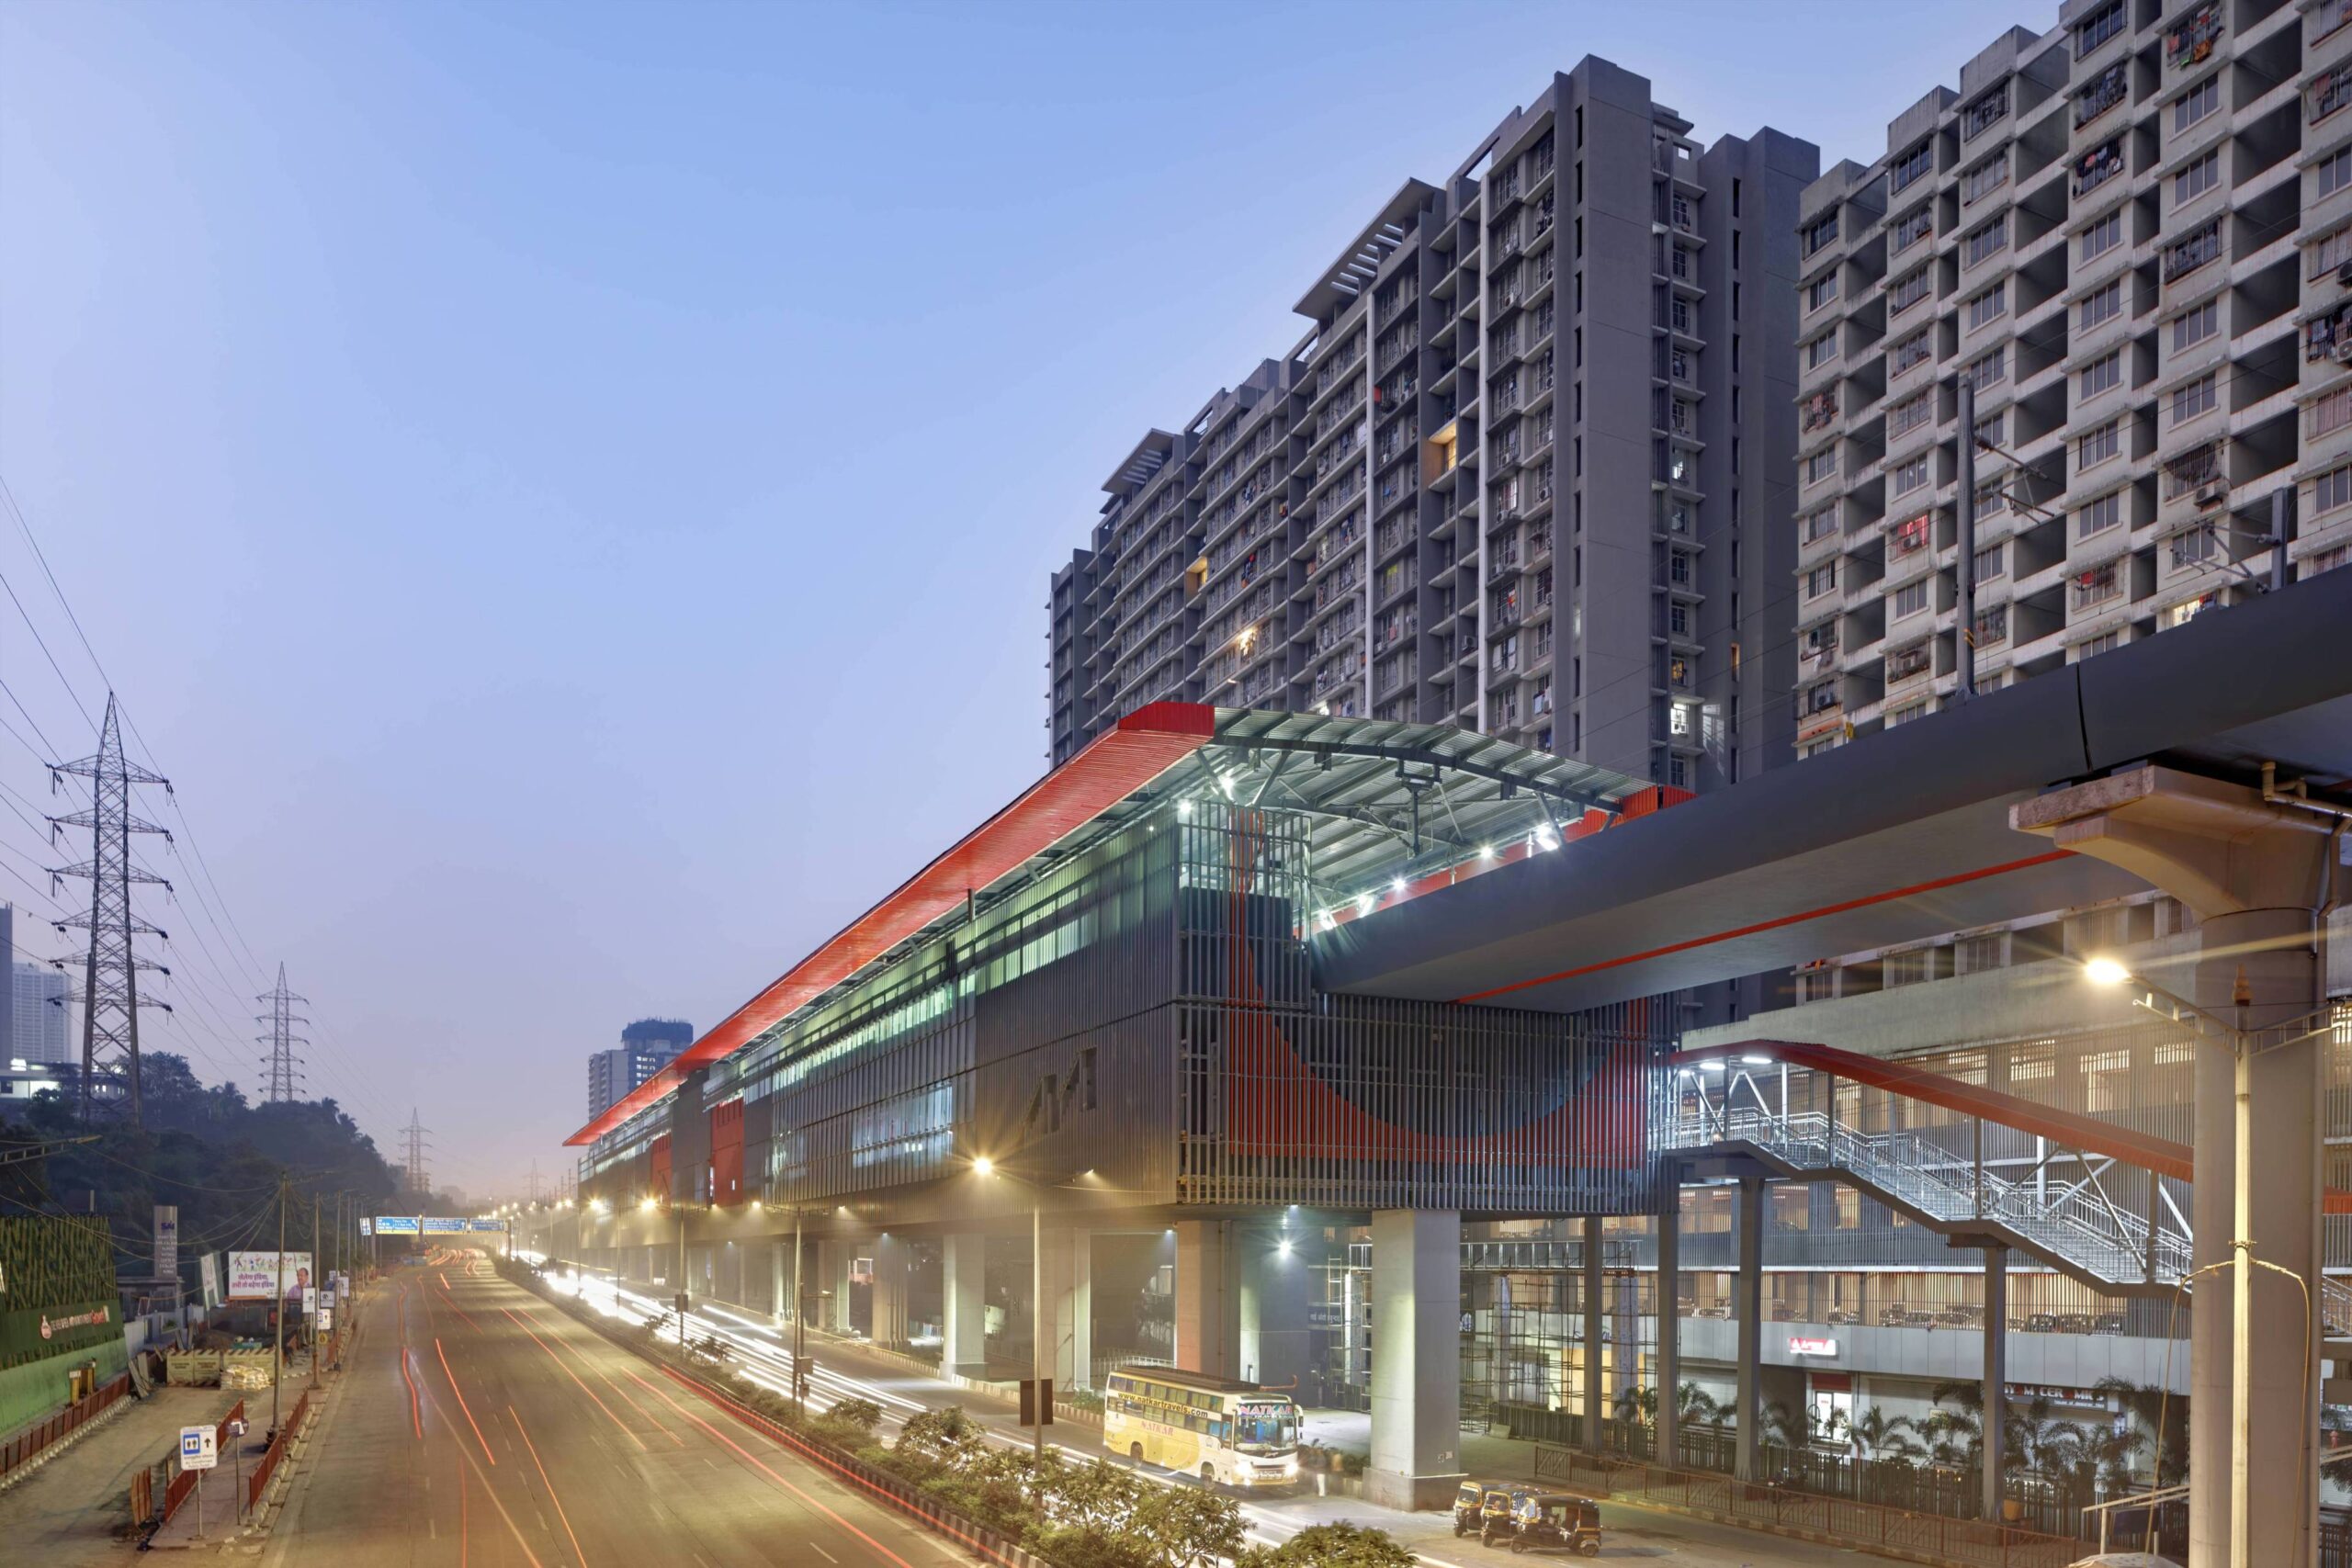 Mumbai Metro Stations-A case for Architects and Architecture-Sourabh Gupta, Archohm 63